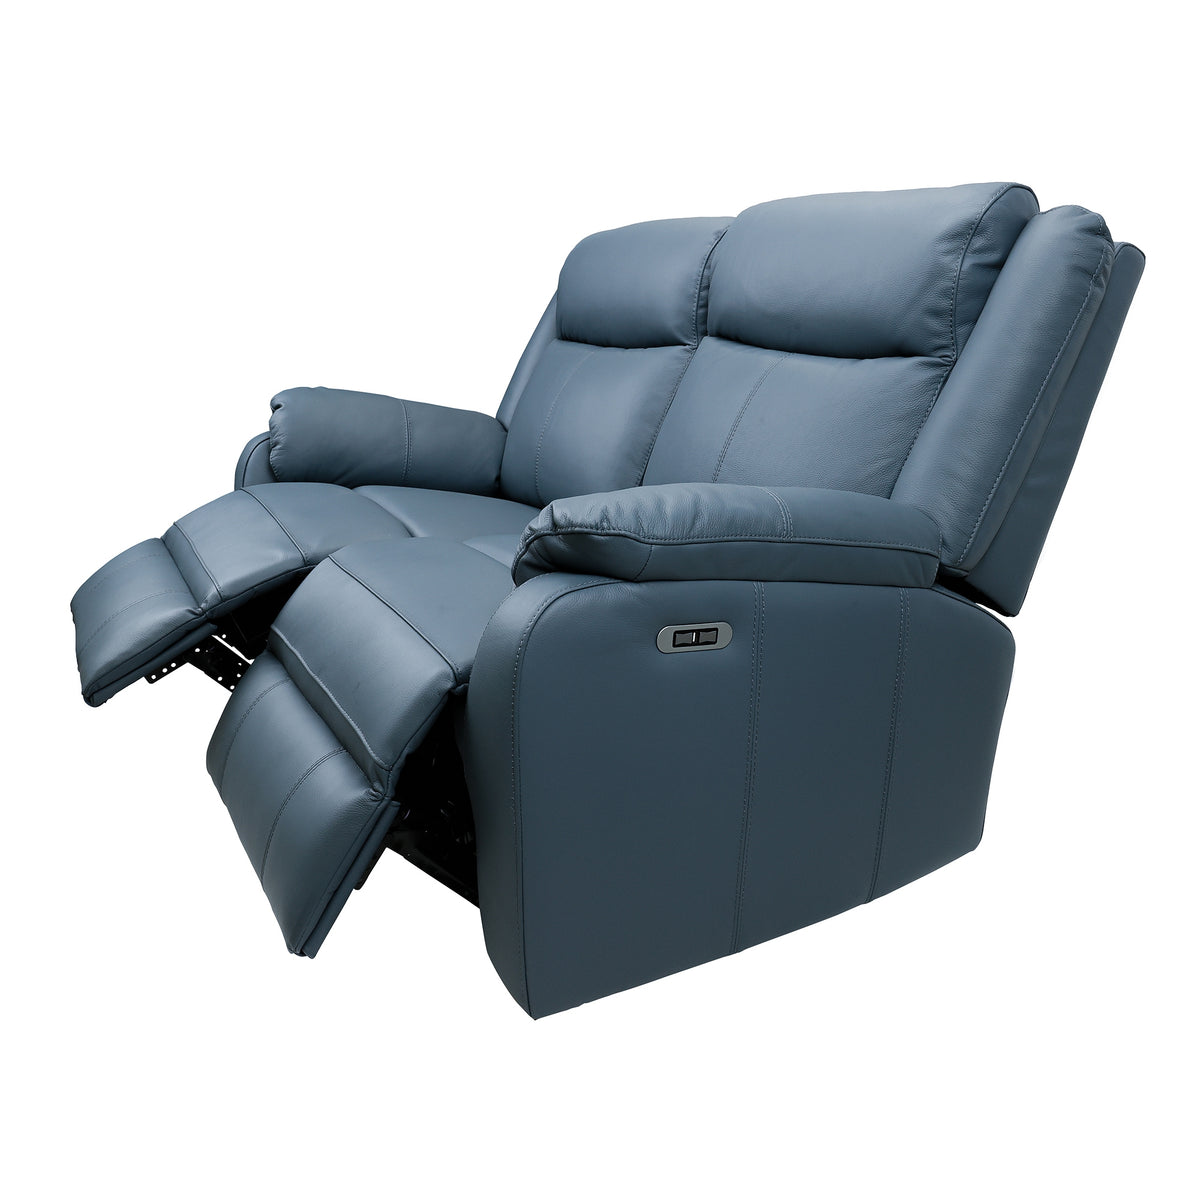 Bella 2 Seater Leather Electric Recliner Sofa Lounge Blue 